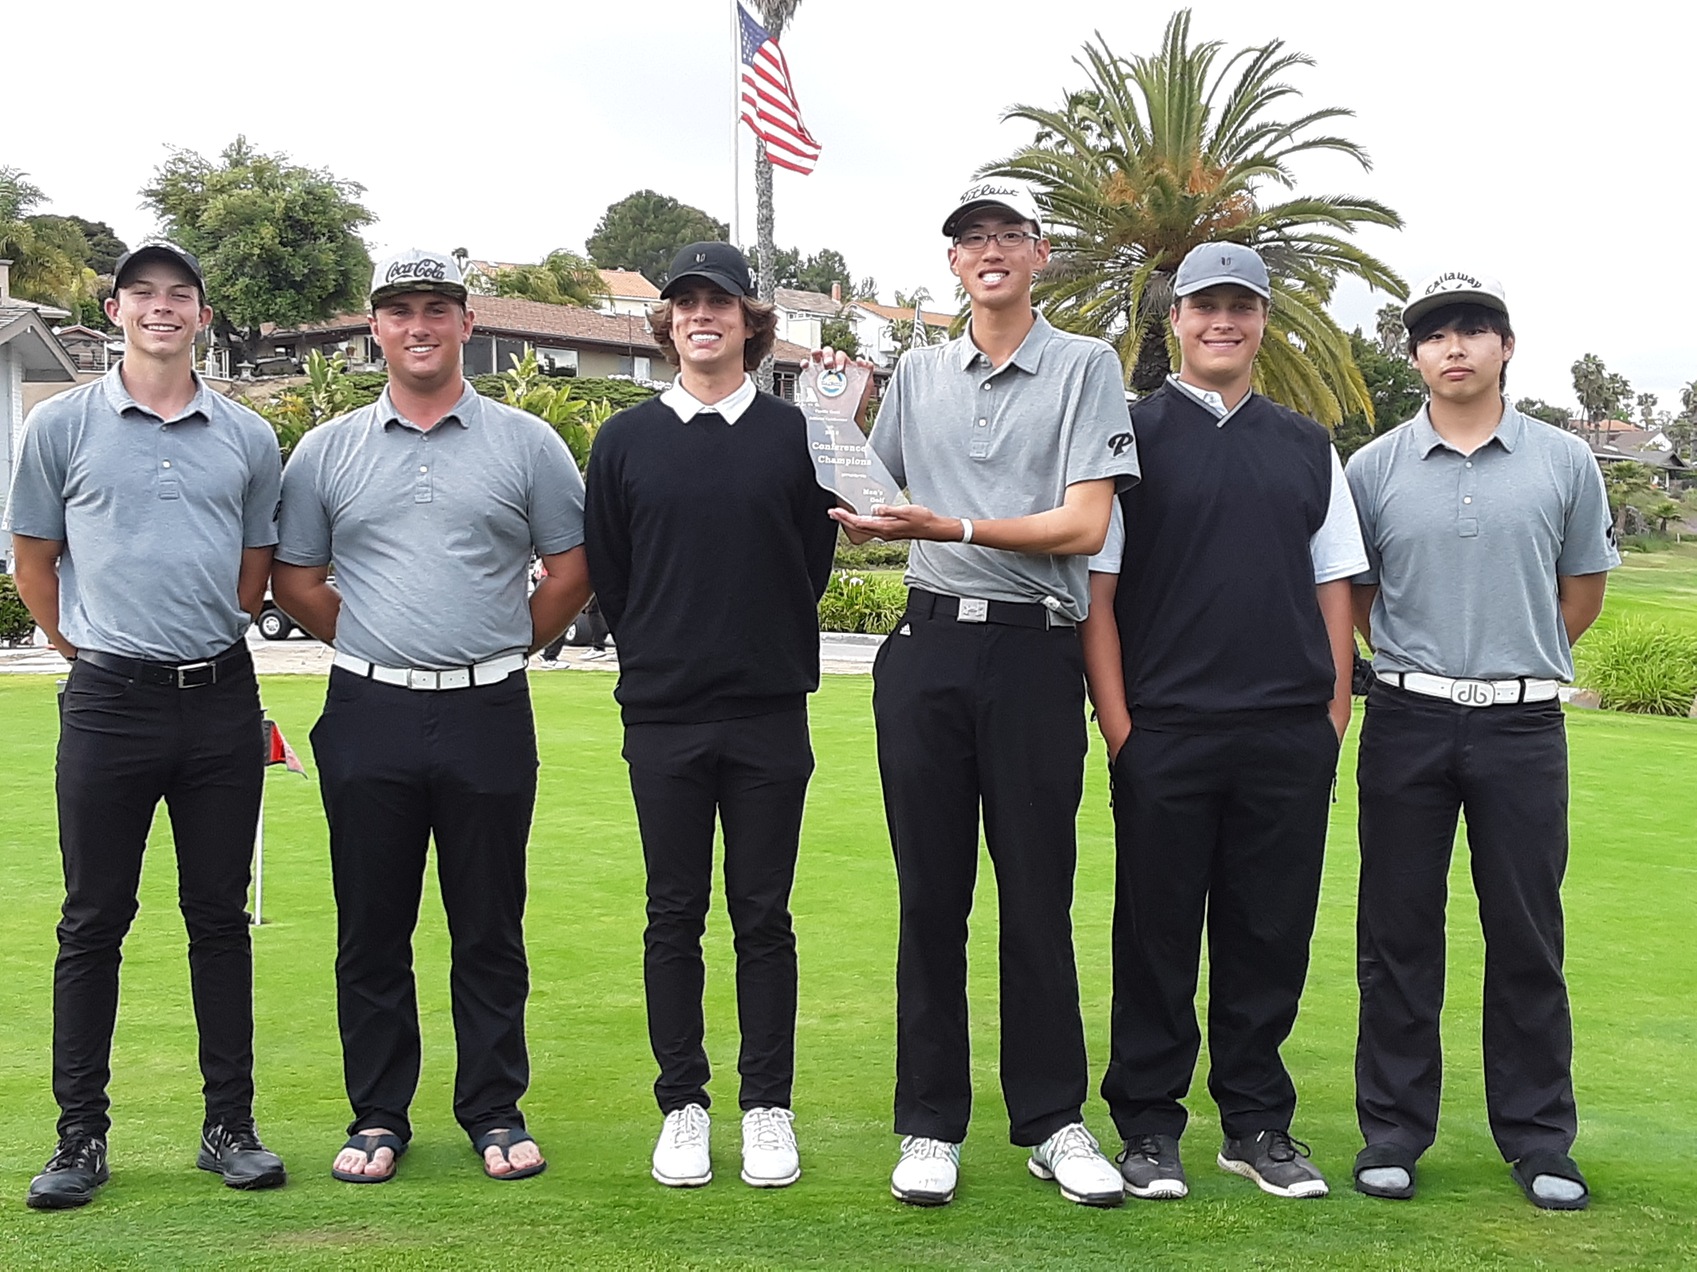 Golf captures PCAC crown after dominating tournament